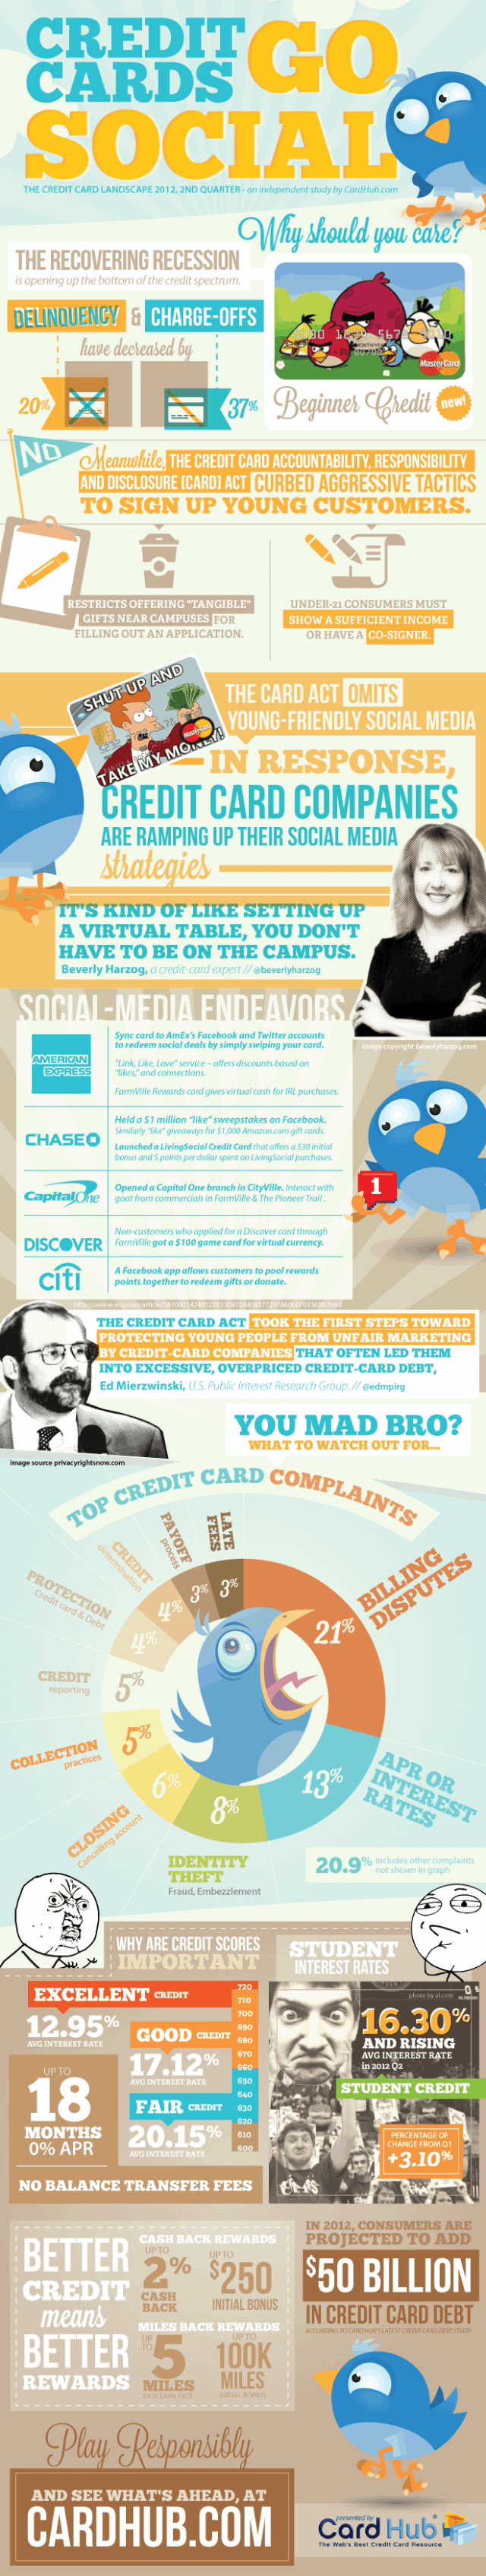 Credit-Cards-Social-Infographic